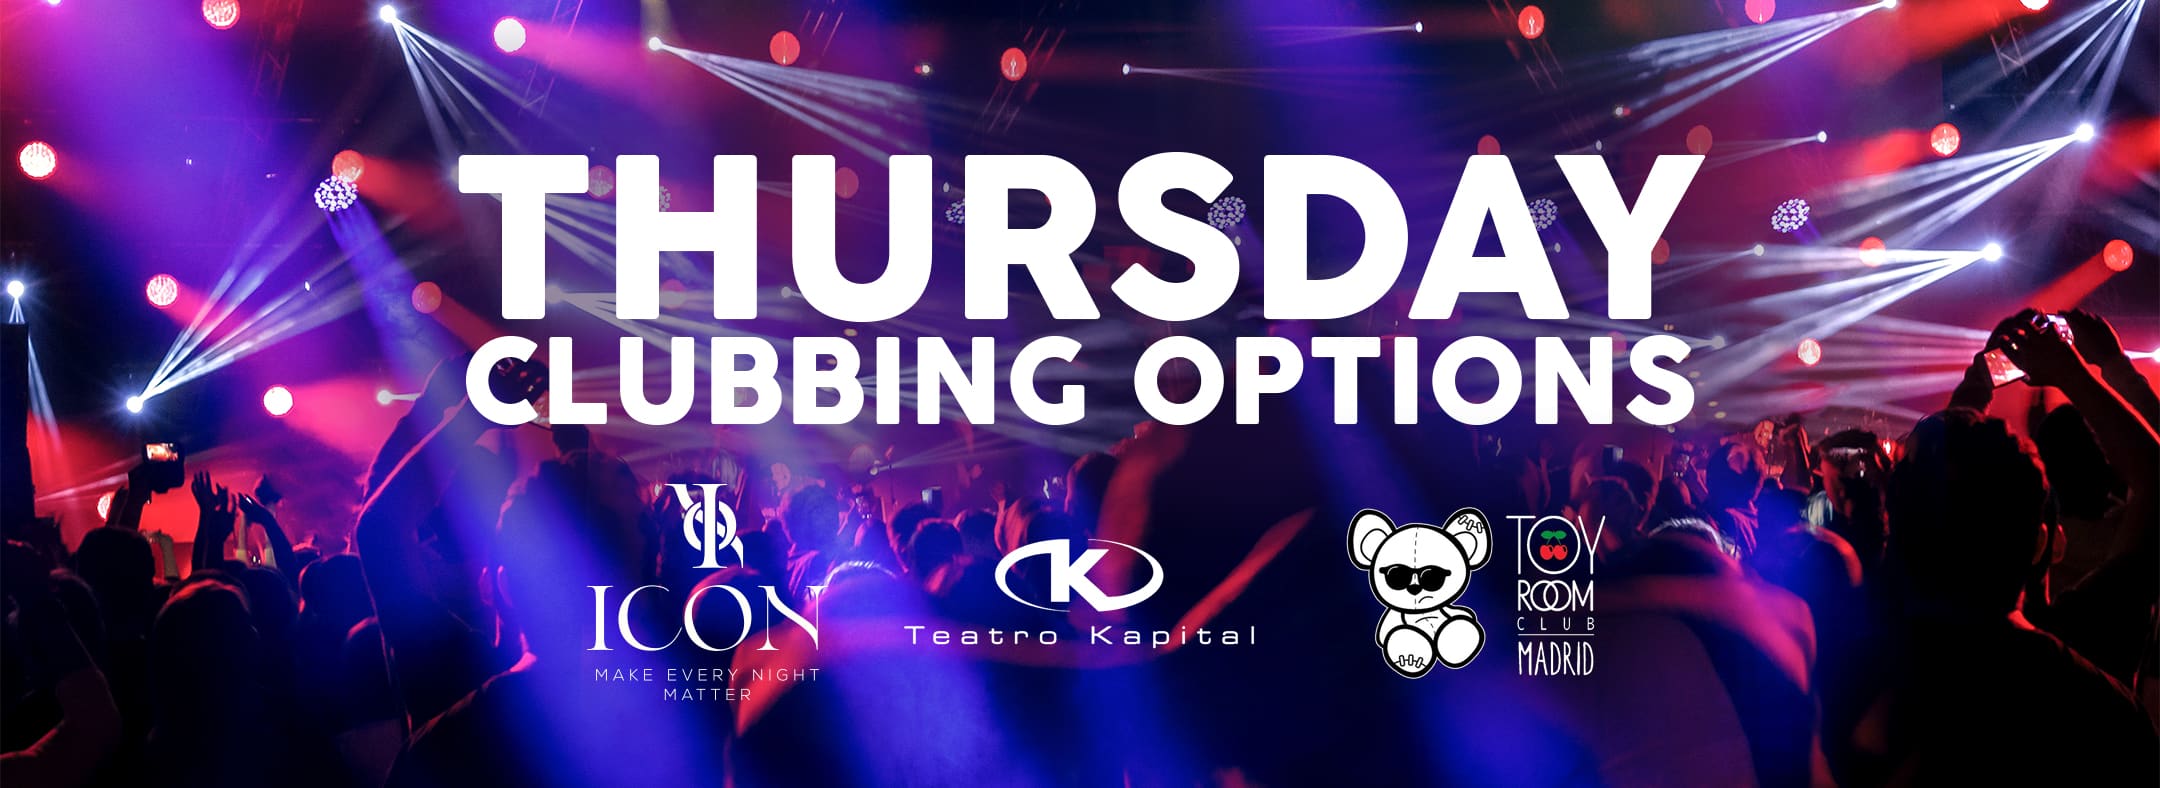 web-banner-thursday-party-options-citylife-madrid